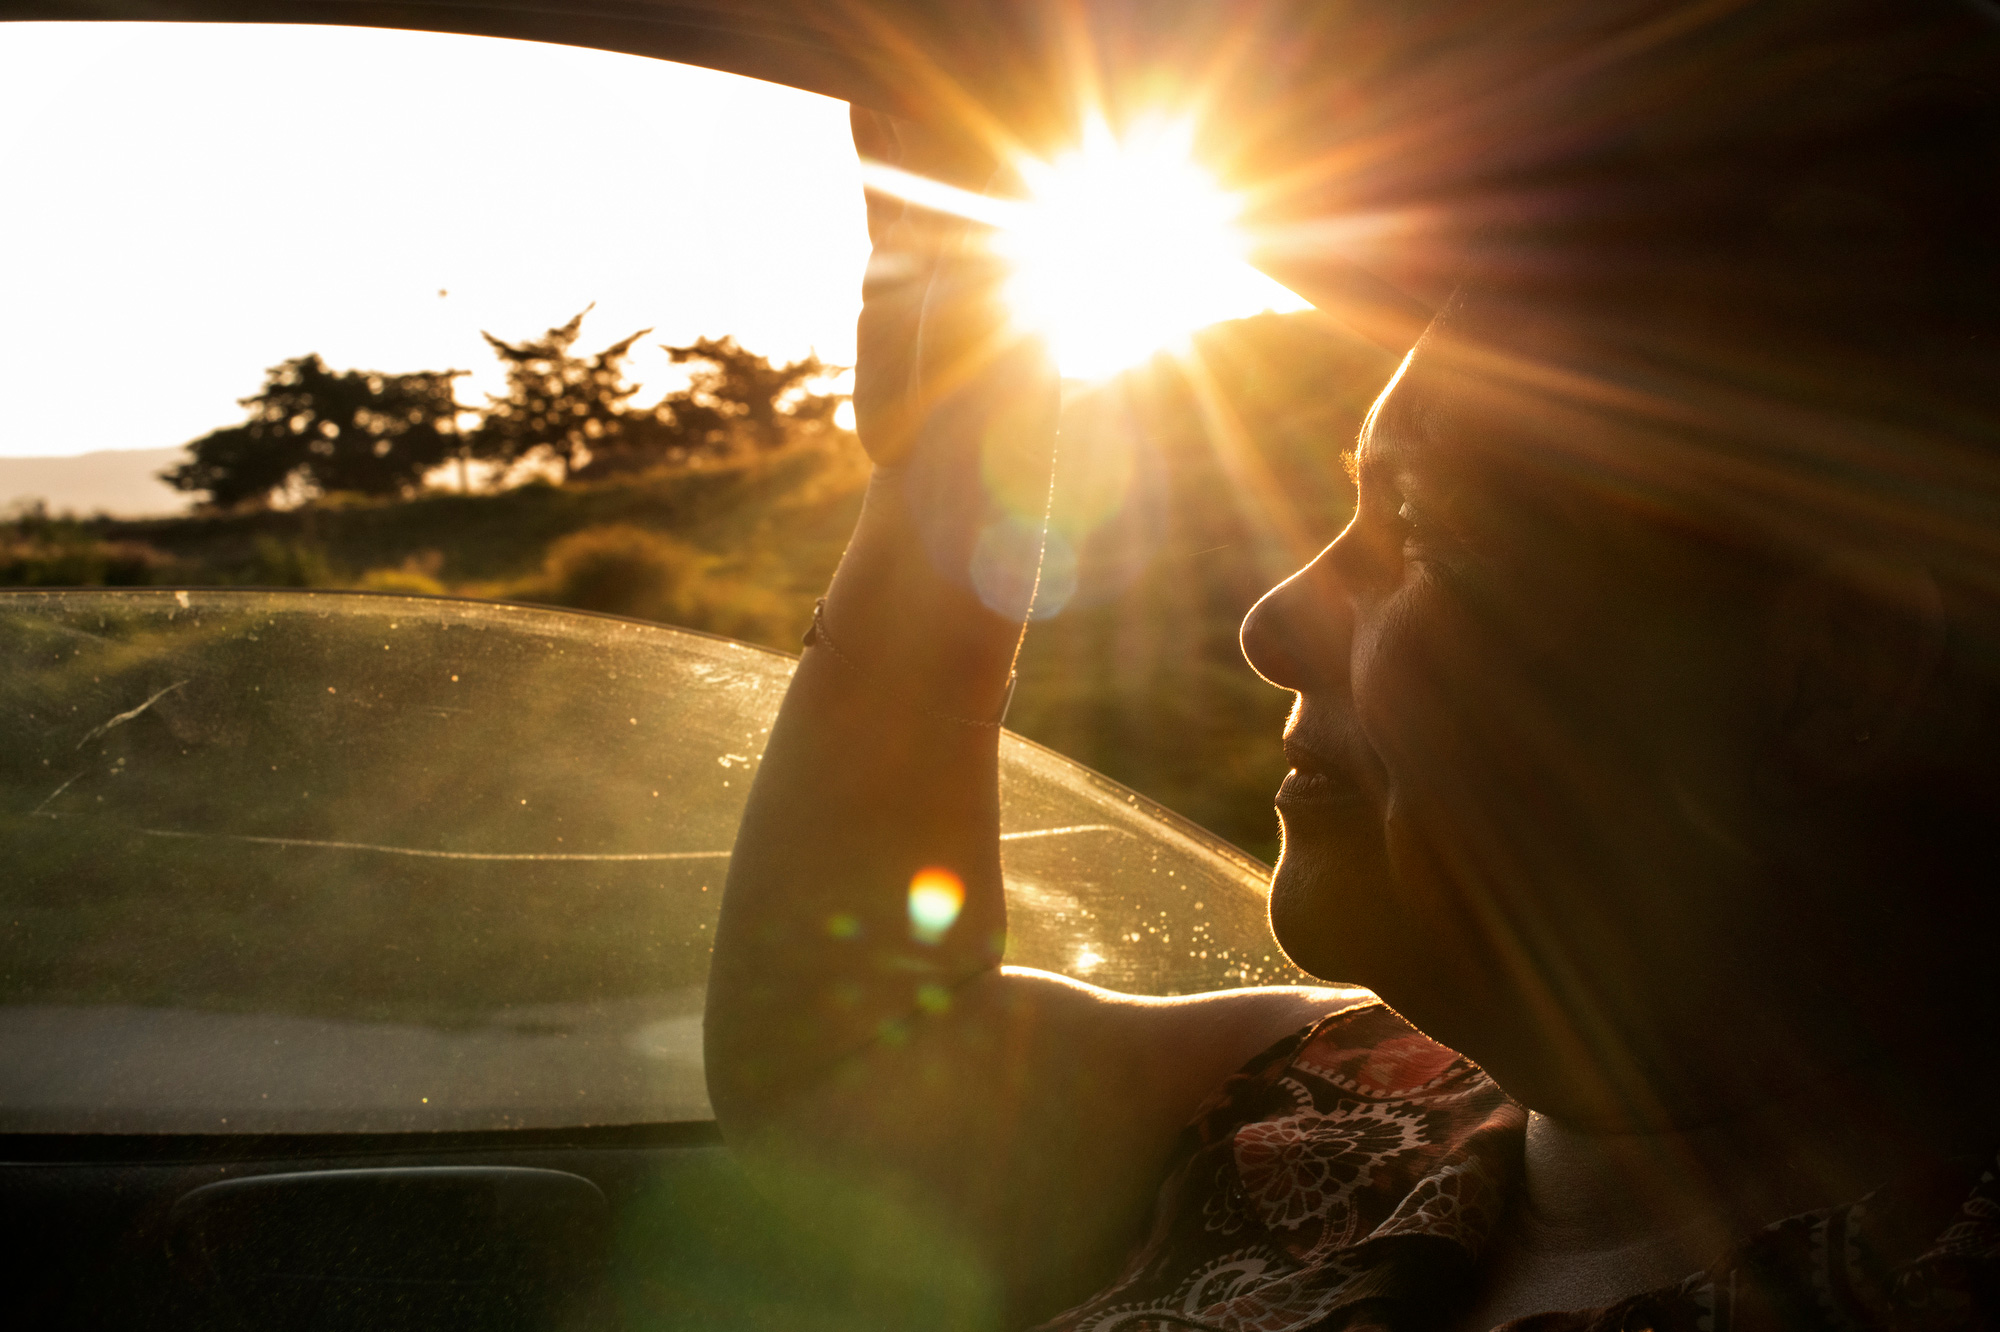 A middle-aged woman (Lourdes) sits in the front passenger seat of a car with the window rolled down. She looks straight ahead to the left side of the image. A golden sunbeam shines in, so her profile is backlit. The car window is rolled down halfway, and Lourdes holds on to the upper window frame with her right hand.